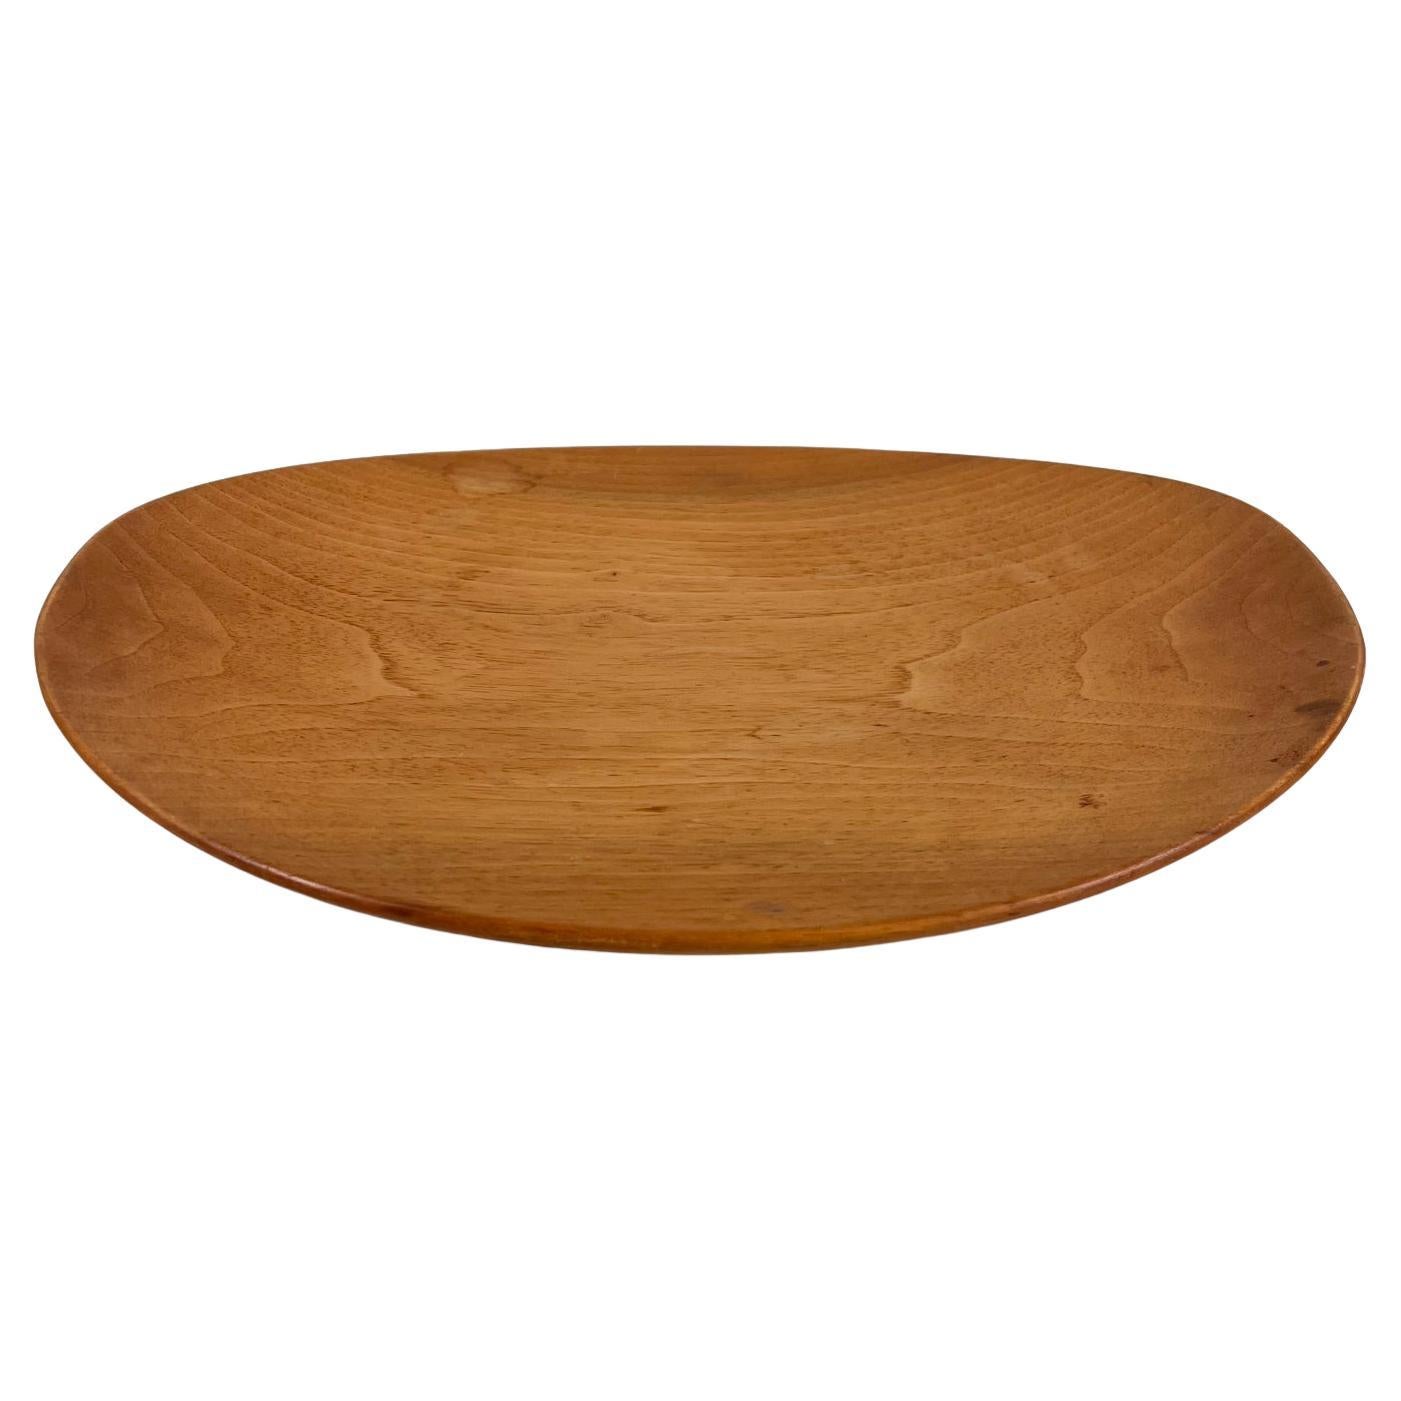 1960s Sculptural Oval Platter Cherry Wood Plate Serving Tray